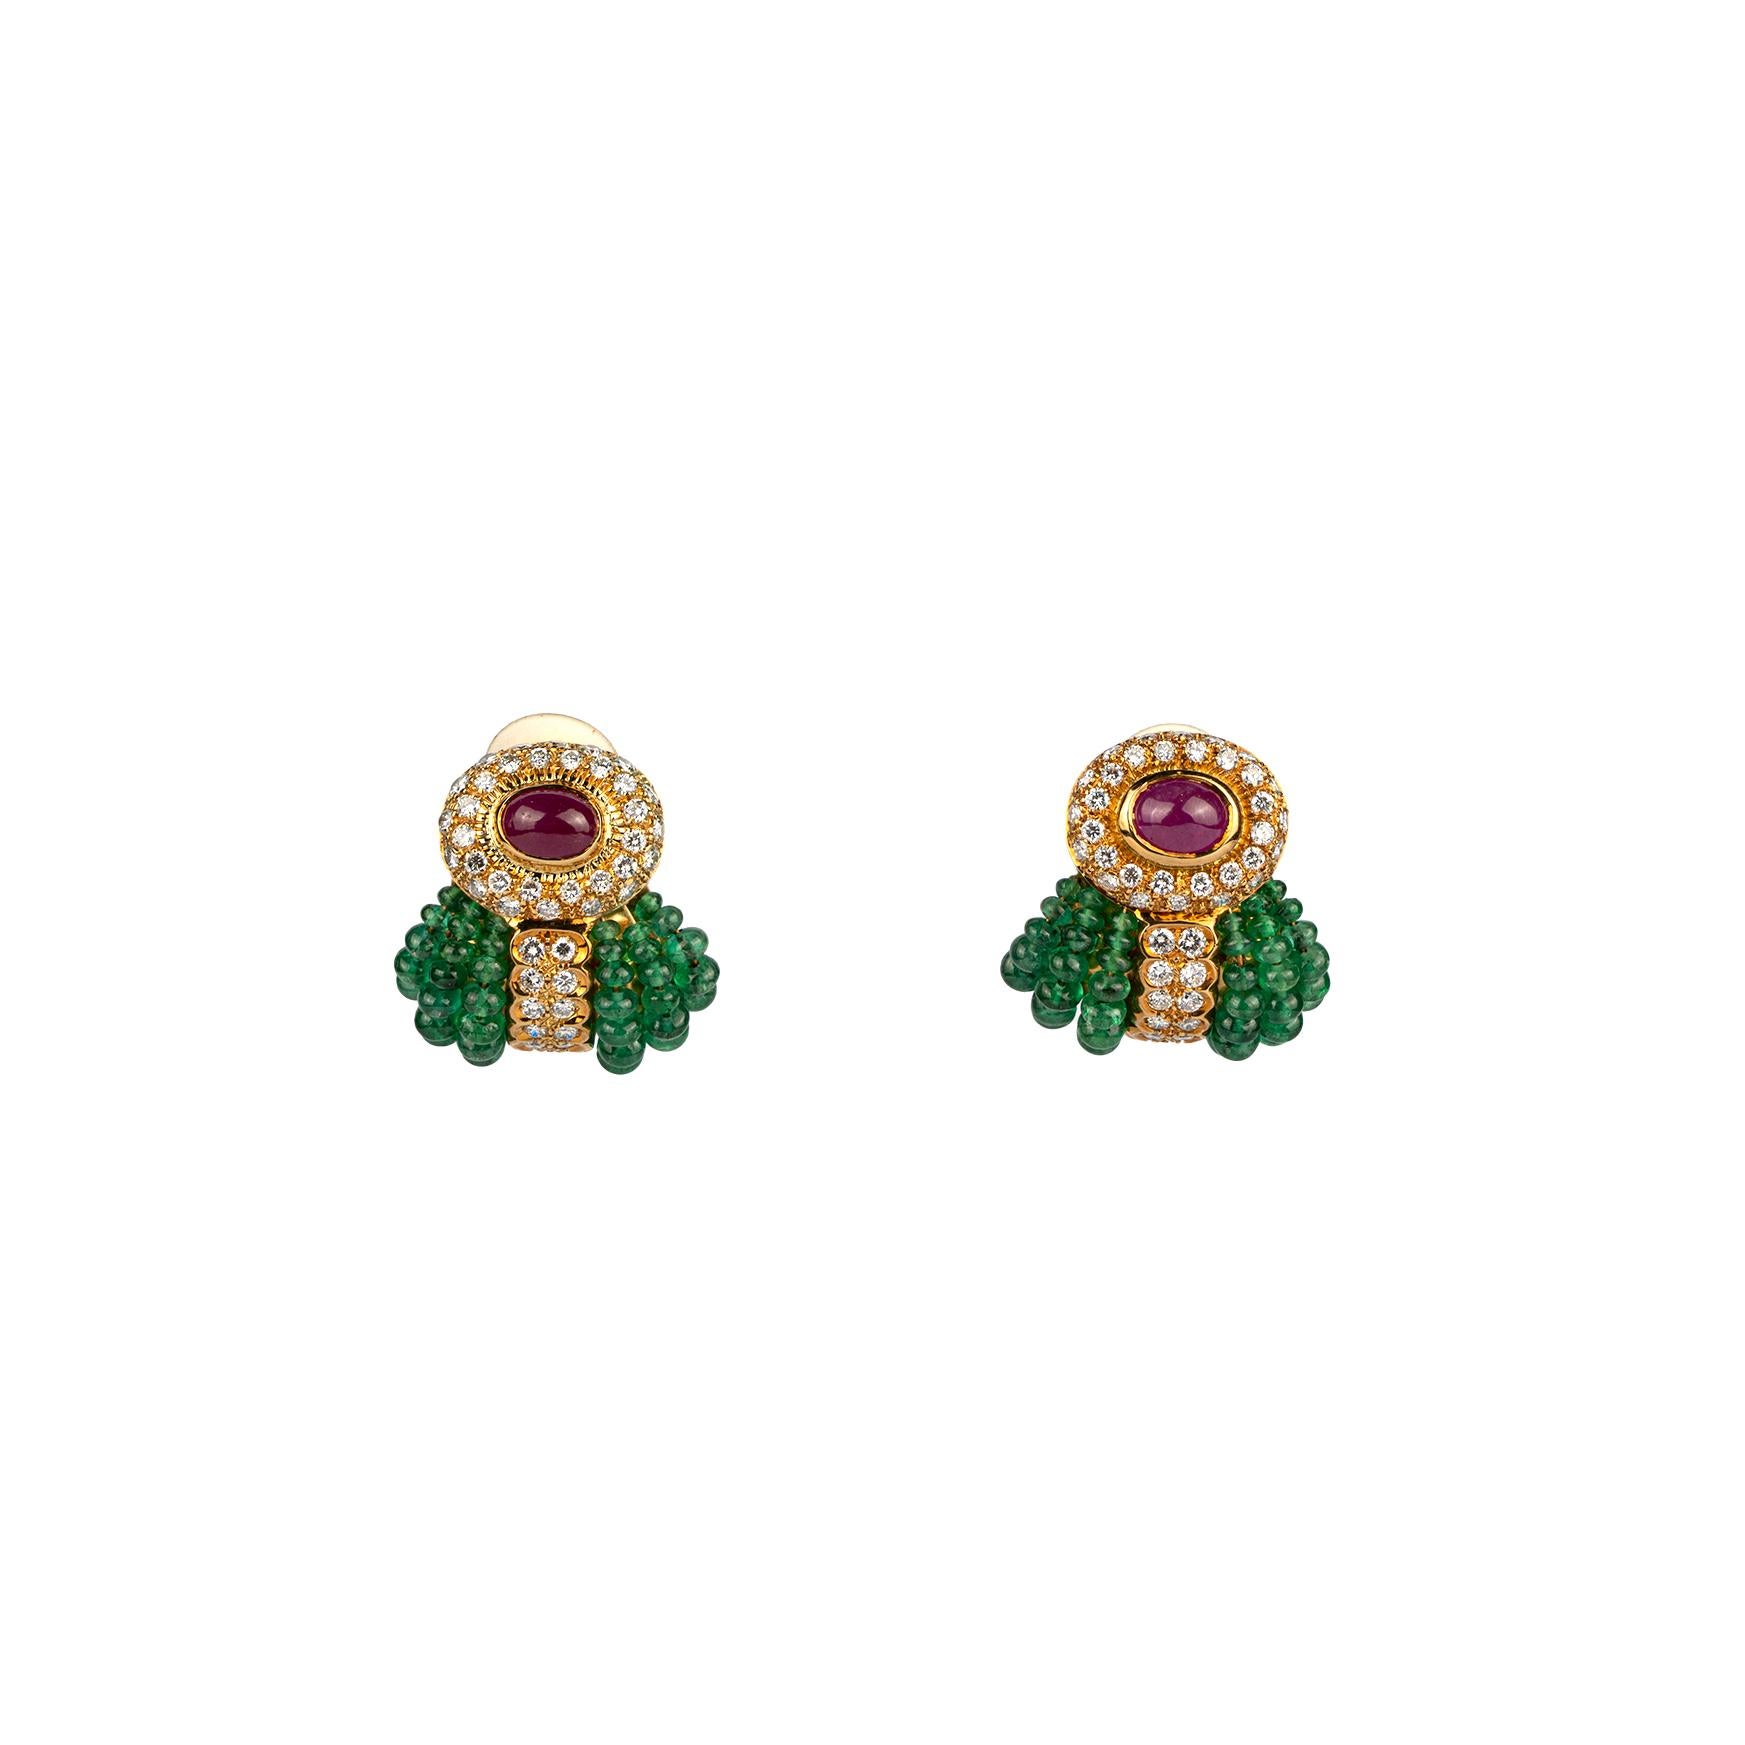 An exquisite pair of cabochon ruby and emerald beaded earrings with diamond surround. Made in Italy, circa 1970.